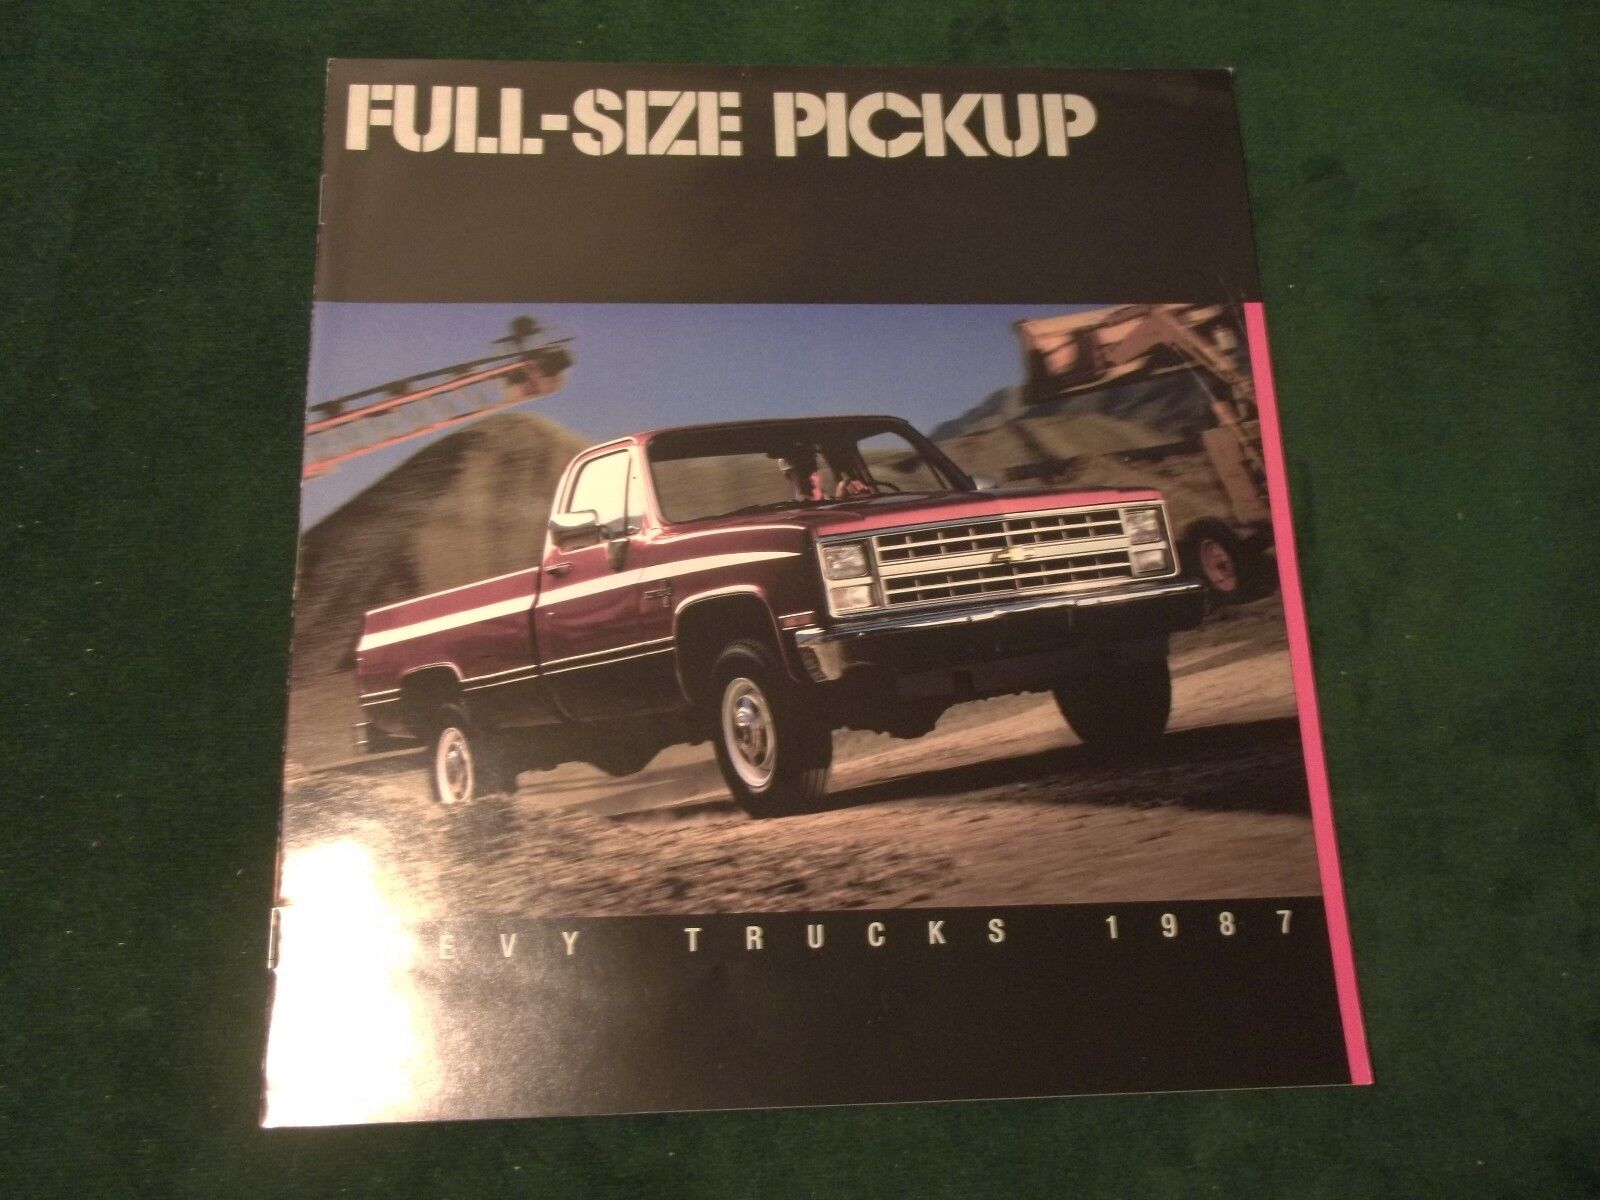 MINT CHEVROLET 1987 CHEVY FULL-SIZE PICKUP SALES BROCHURE NEW (#539)